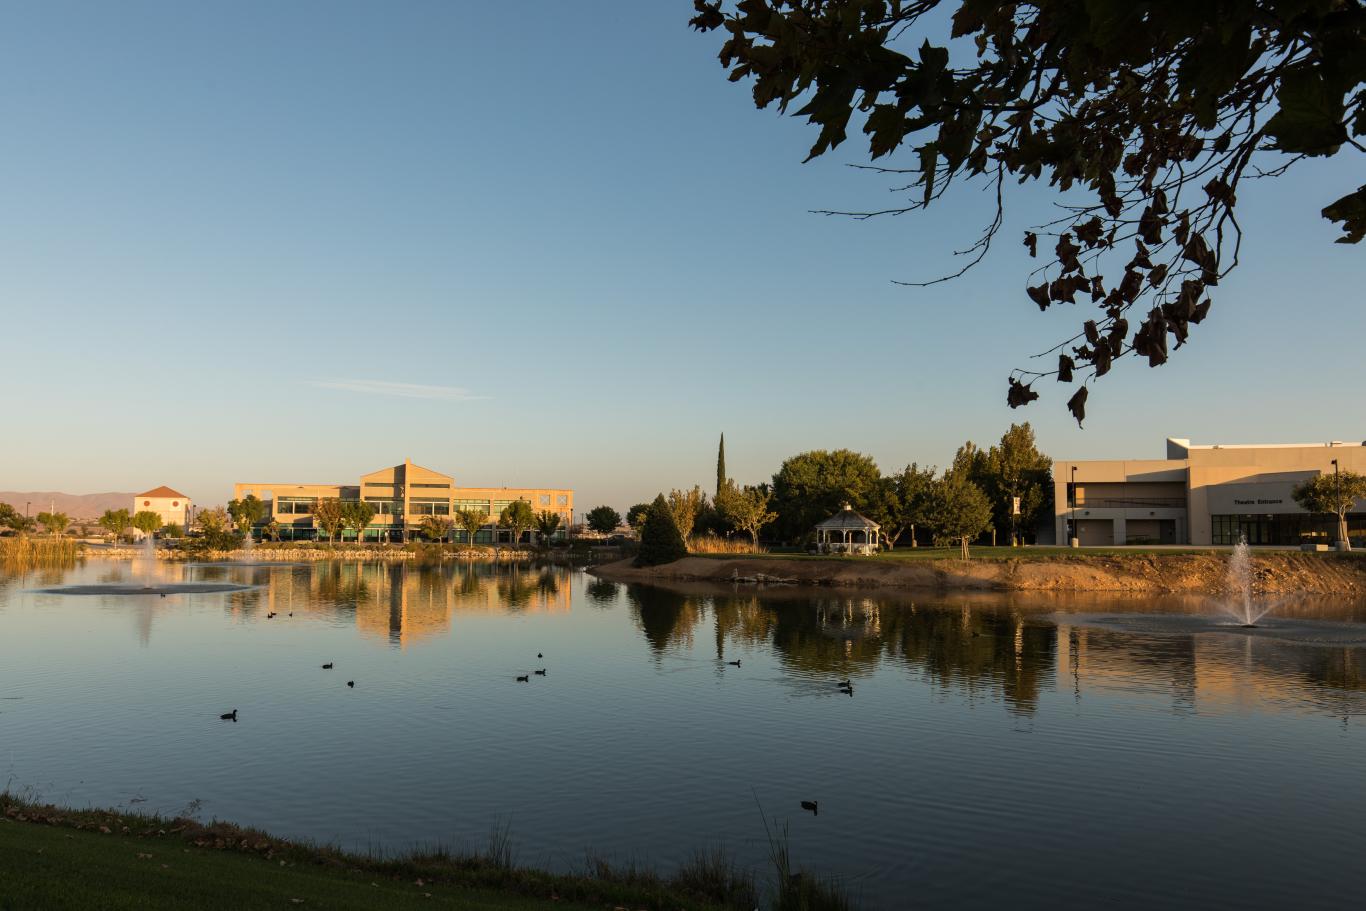 Ducks swimming in lake with VVC campus buildings in the background